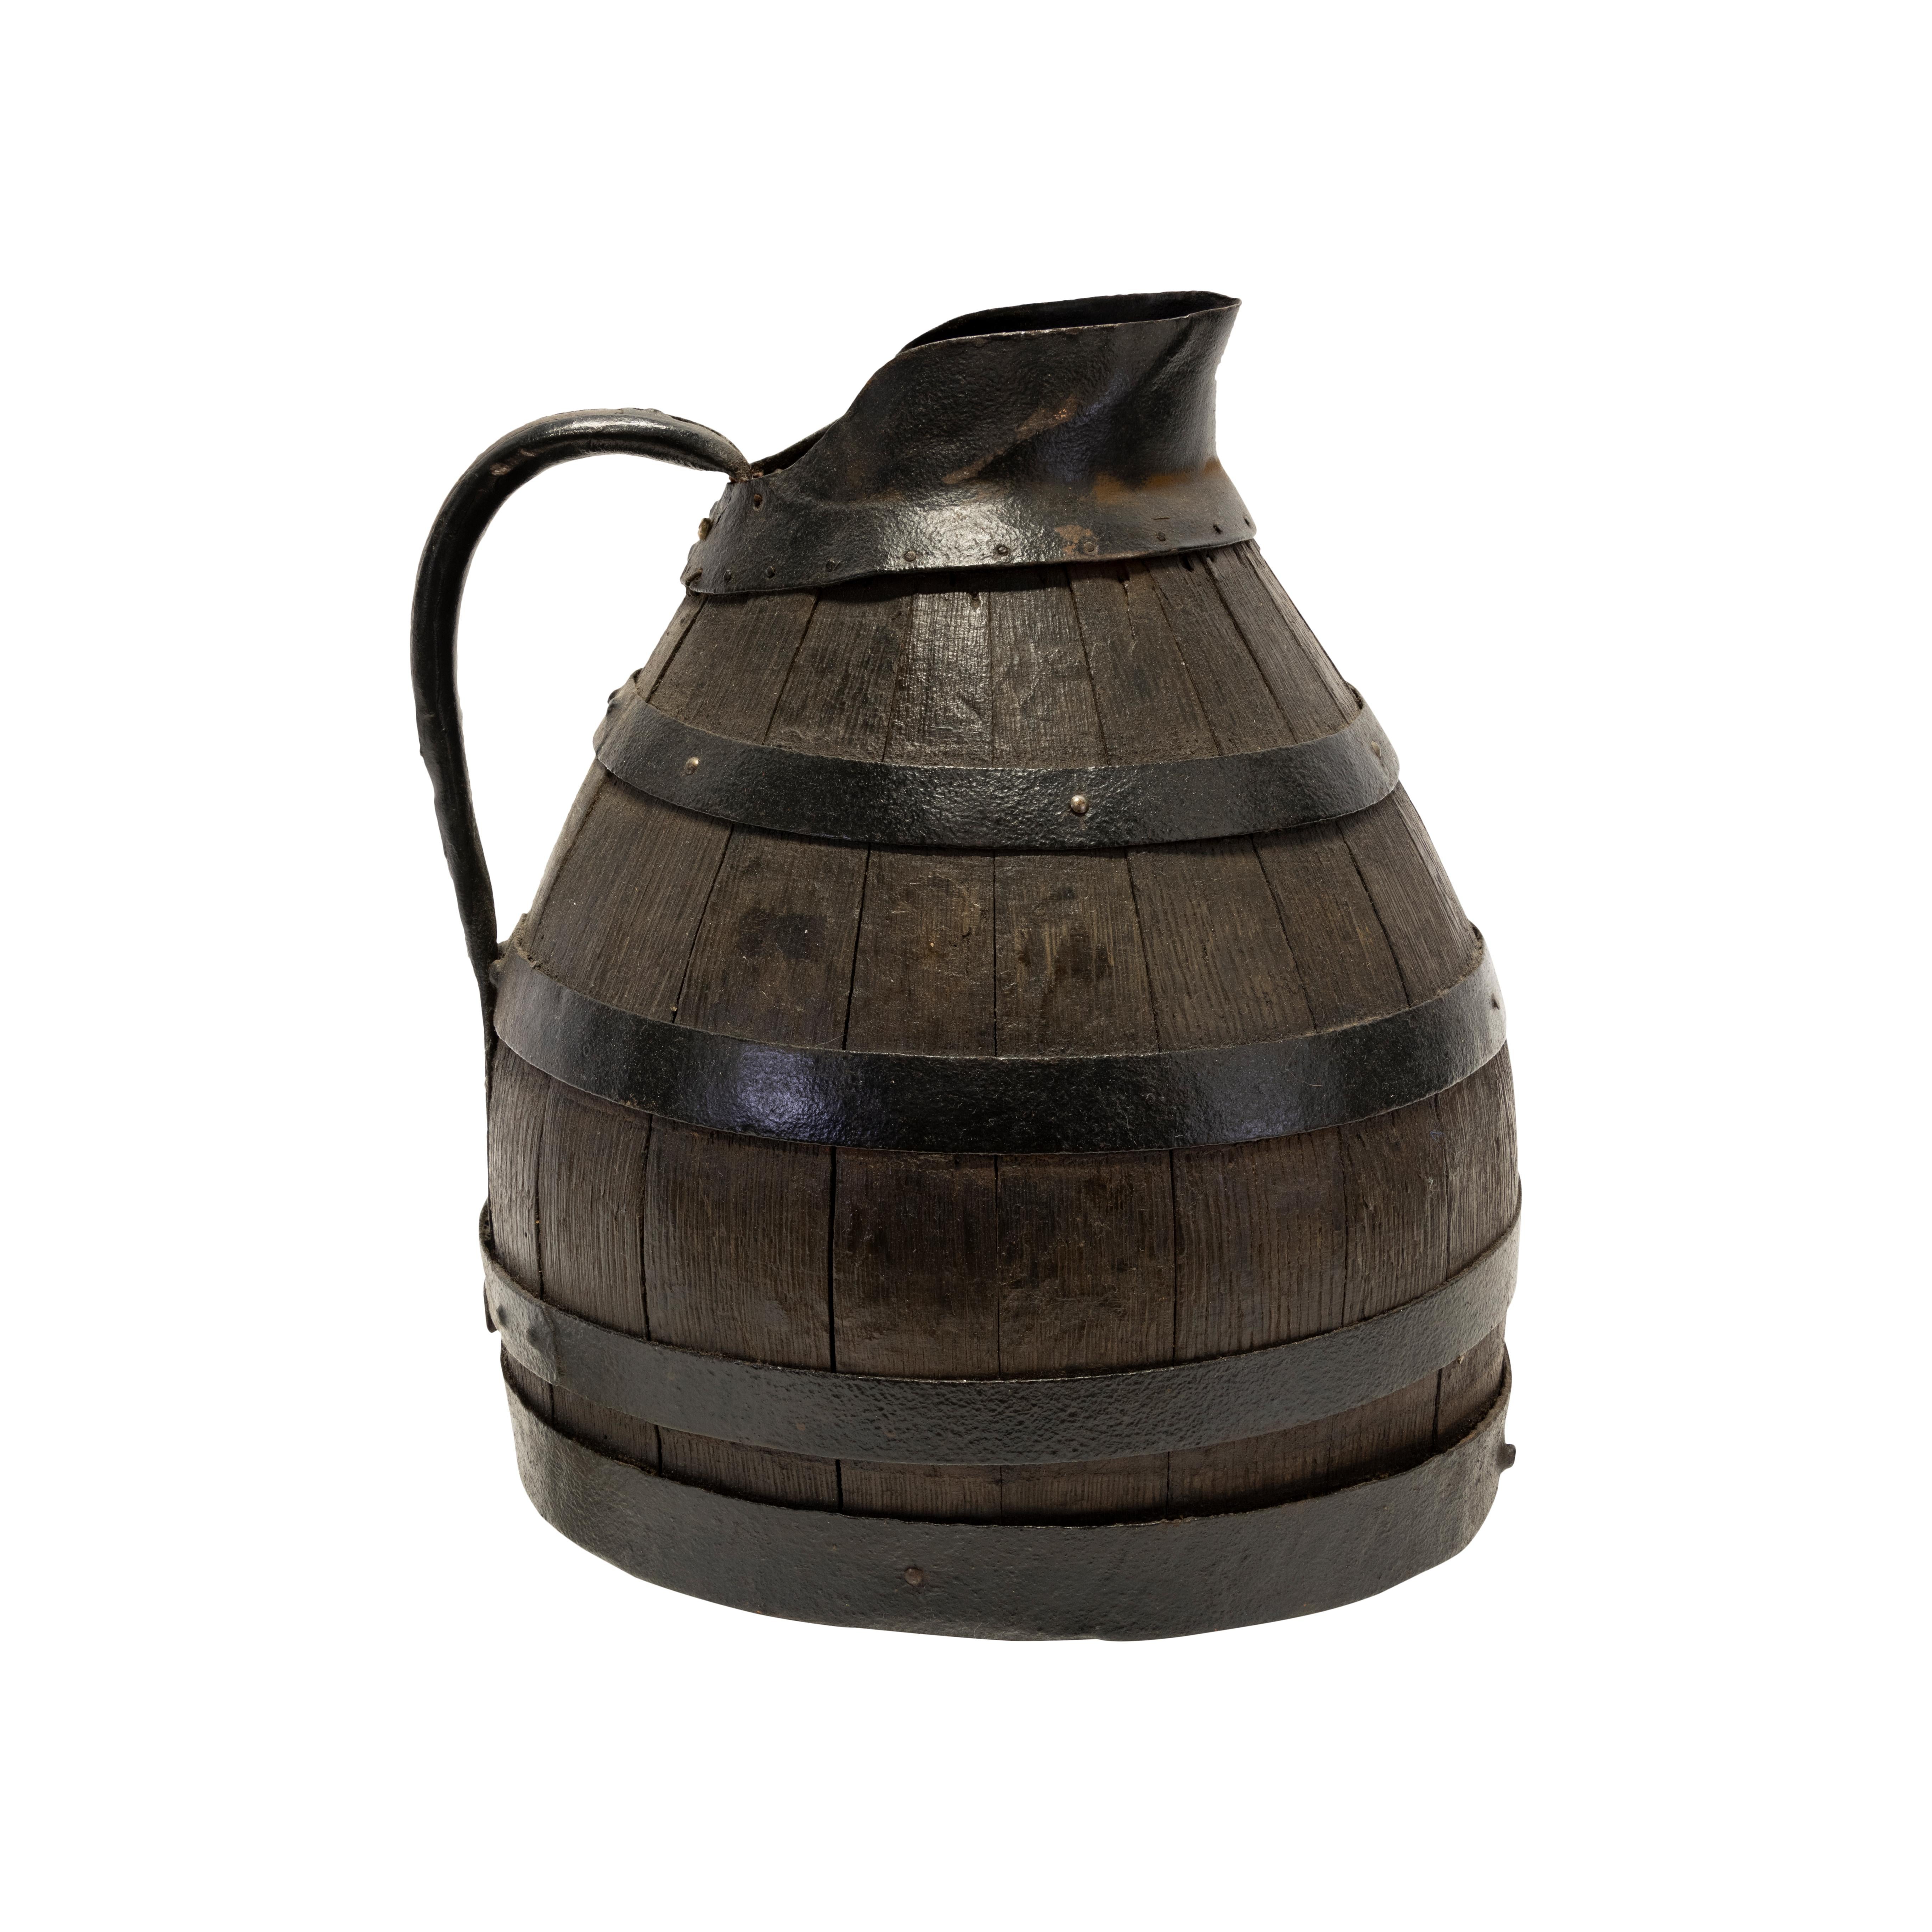 19th Century French Alascian wood and iron banded wine pitcher.

Period: Last quarter of the 19th century
Origin: France
Size: 14